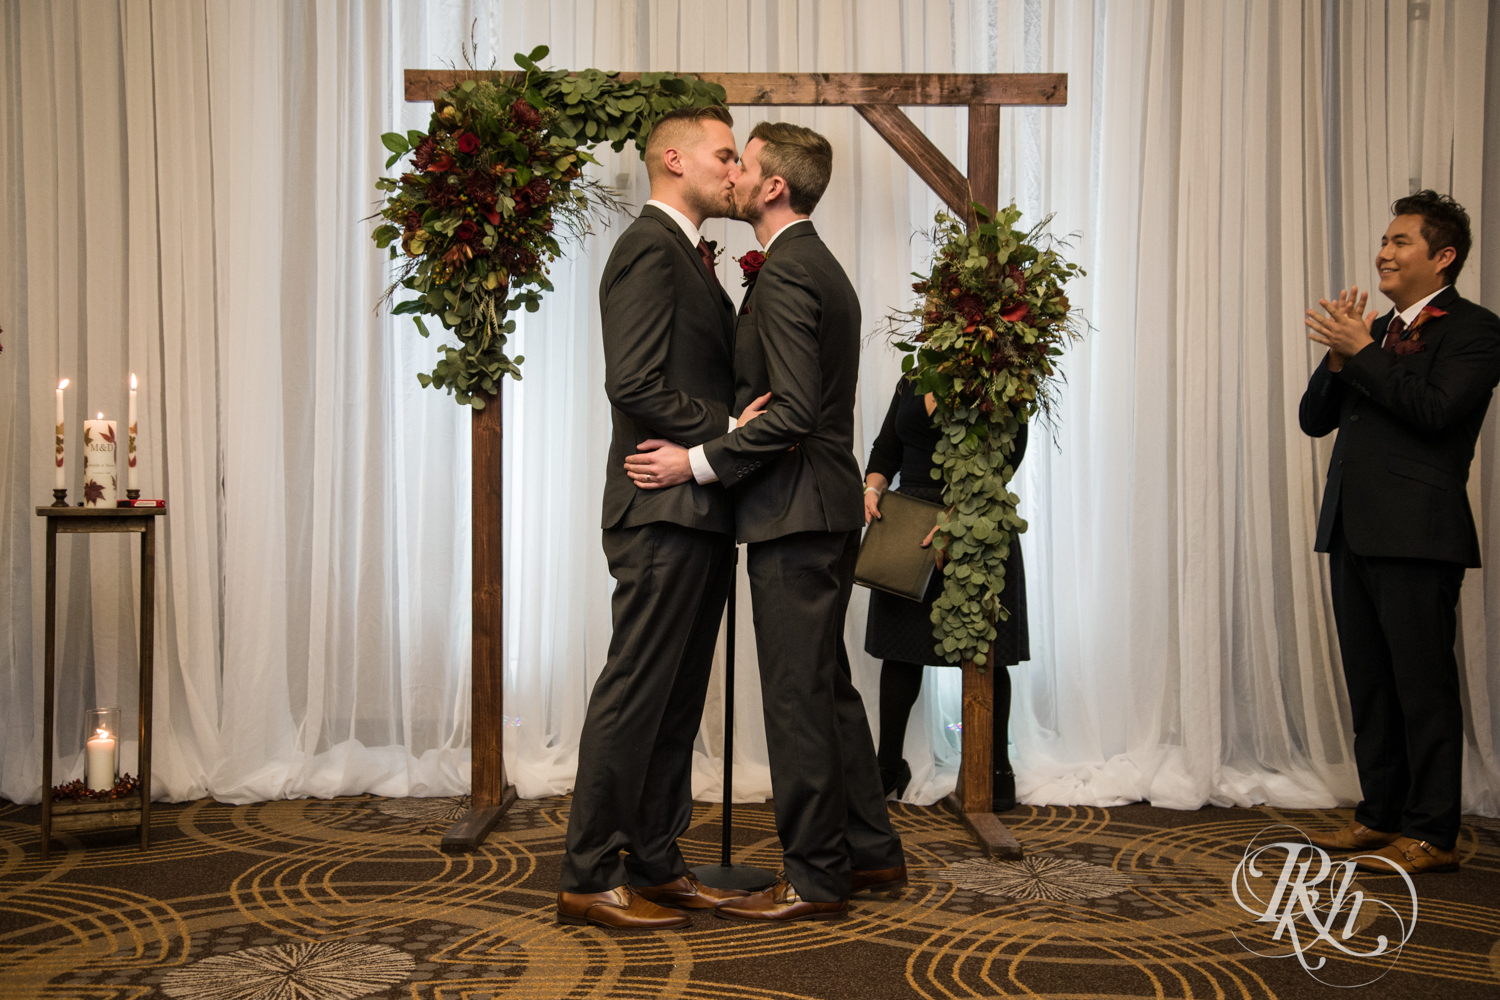 Grooms kiss during LGBTQ wedding ceremony at Courtyard by Marriott Minneapolis.